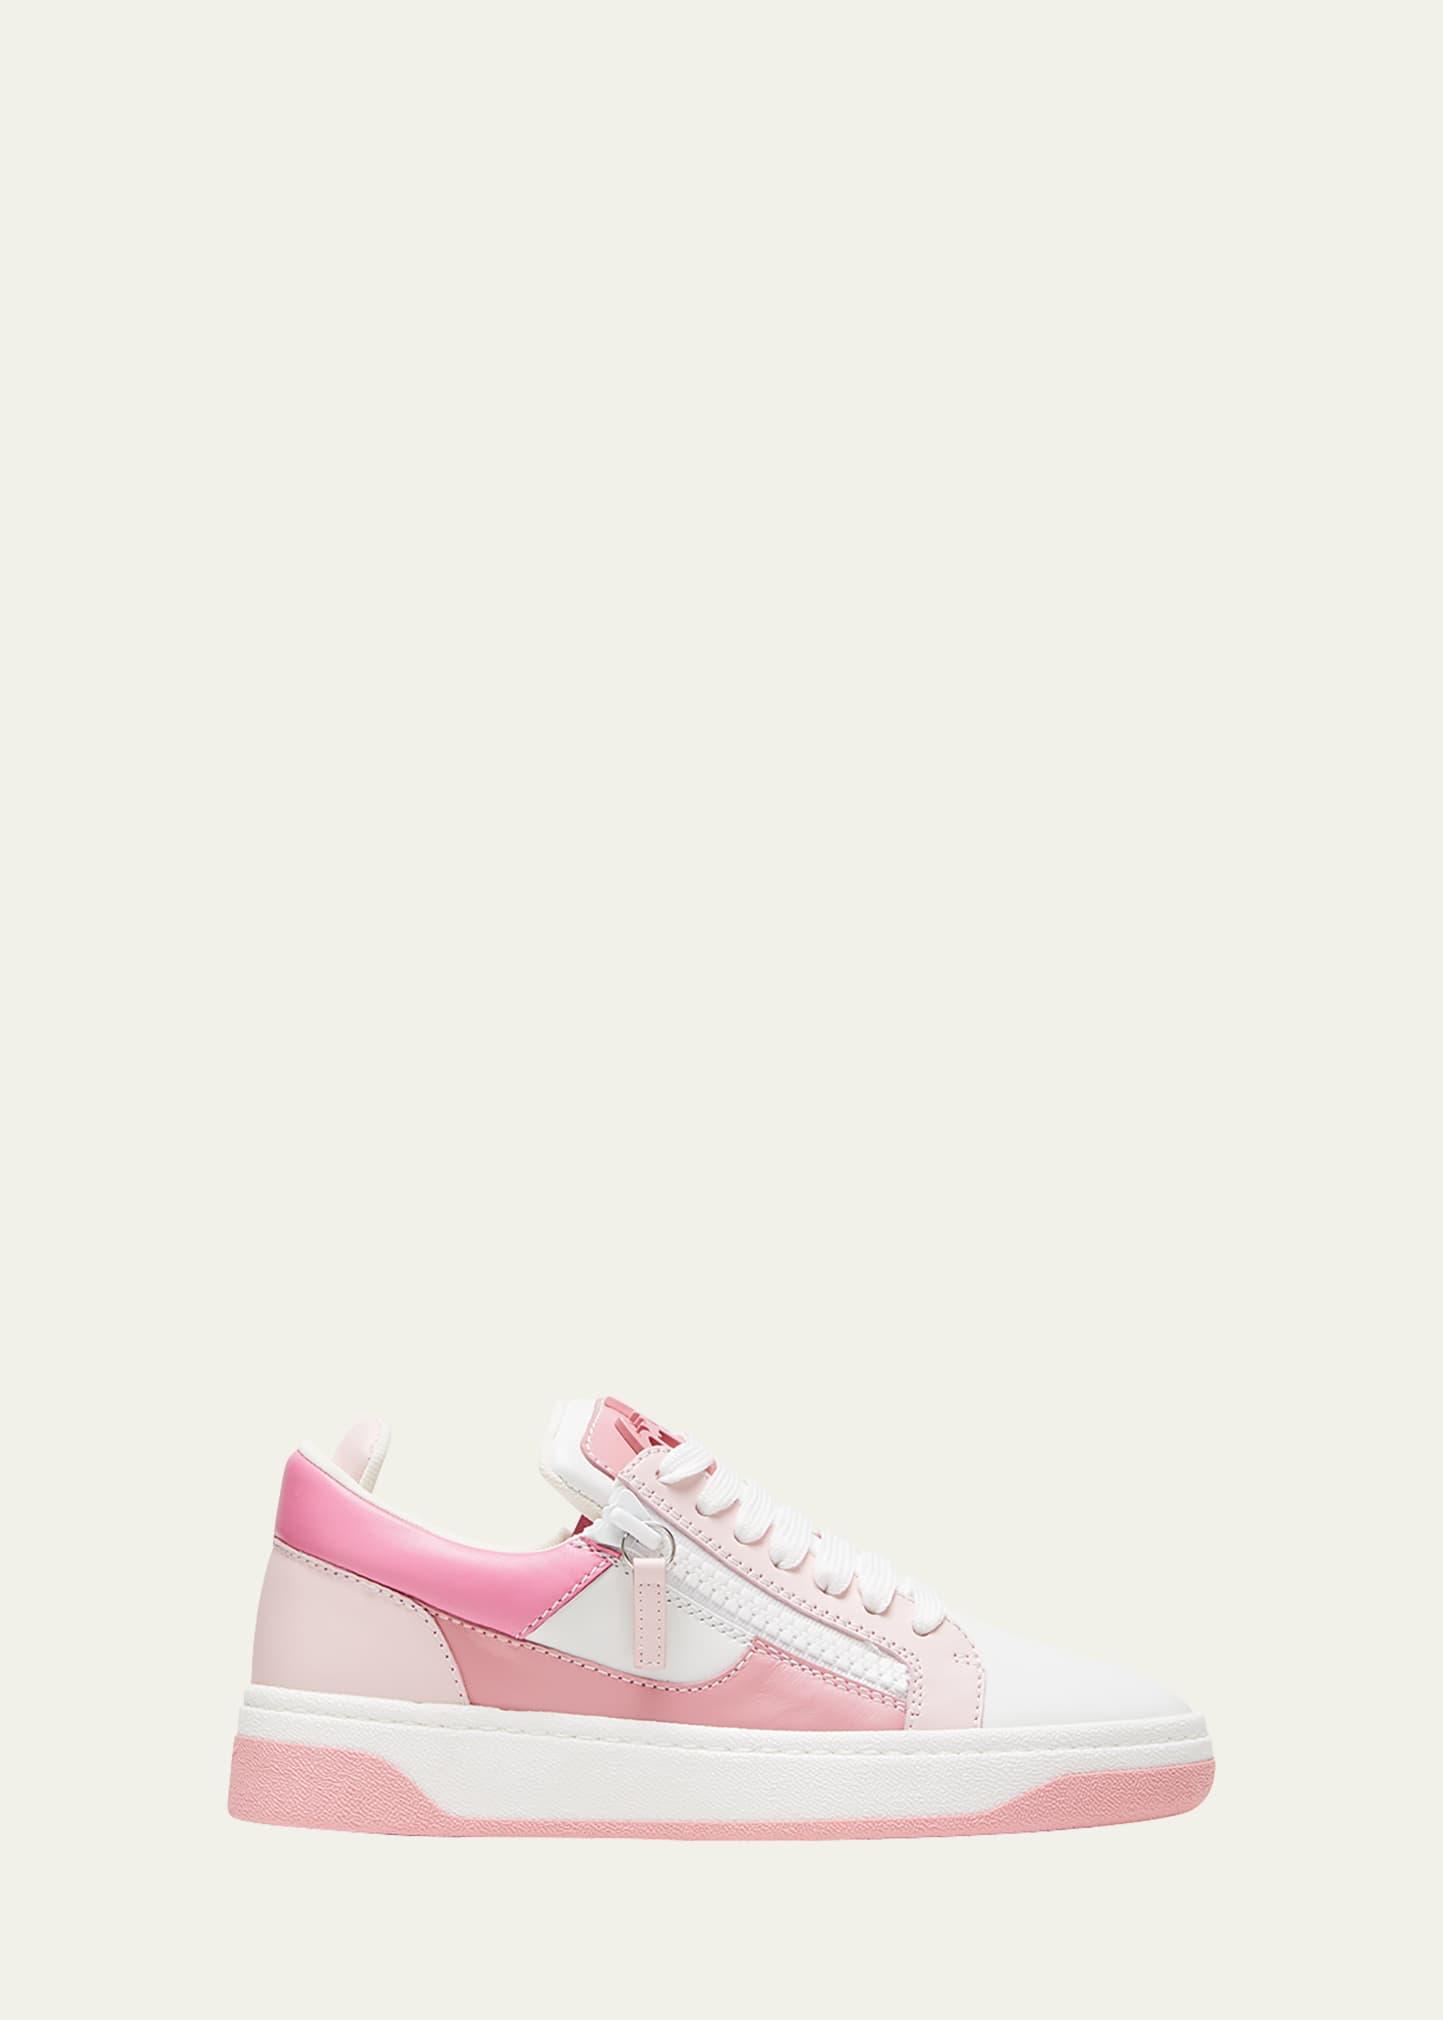 Giuseppe Zanotti Colorblock Dual-zip Mixed Leather Sneakers in Pink | Lyst